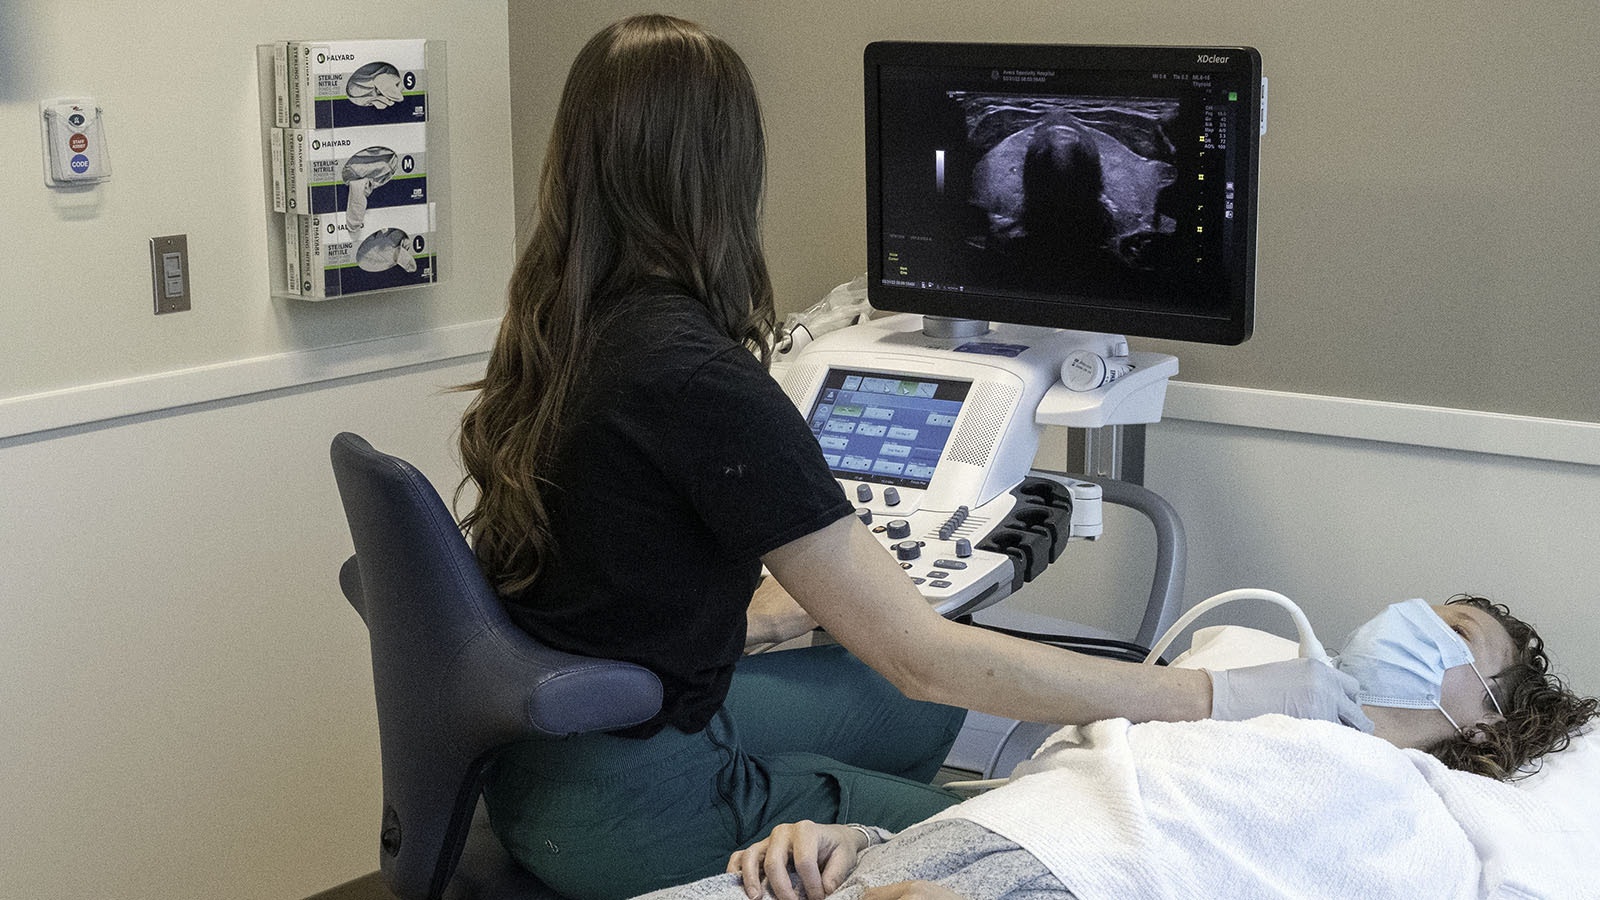 State-of-the-art ultrasound equipment is going to 143 health clinics across rural Wyoming thanks to a $13.9 million donation from the Helmsley Charitable Trust.